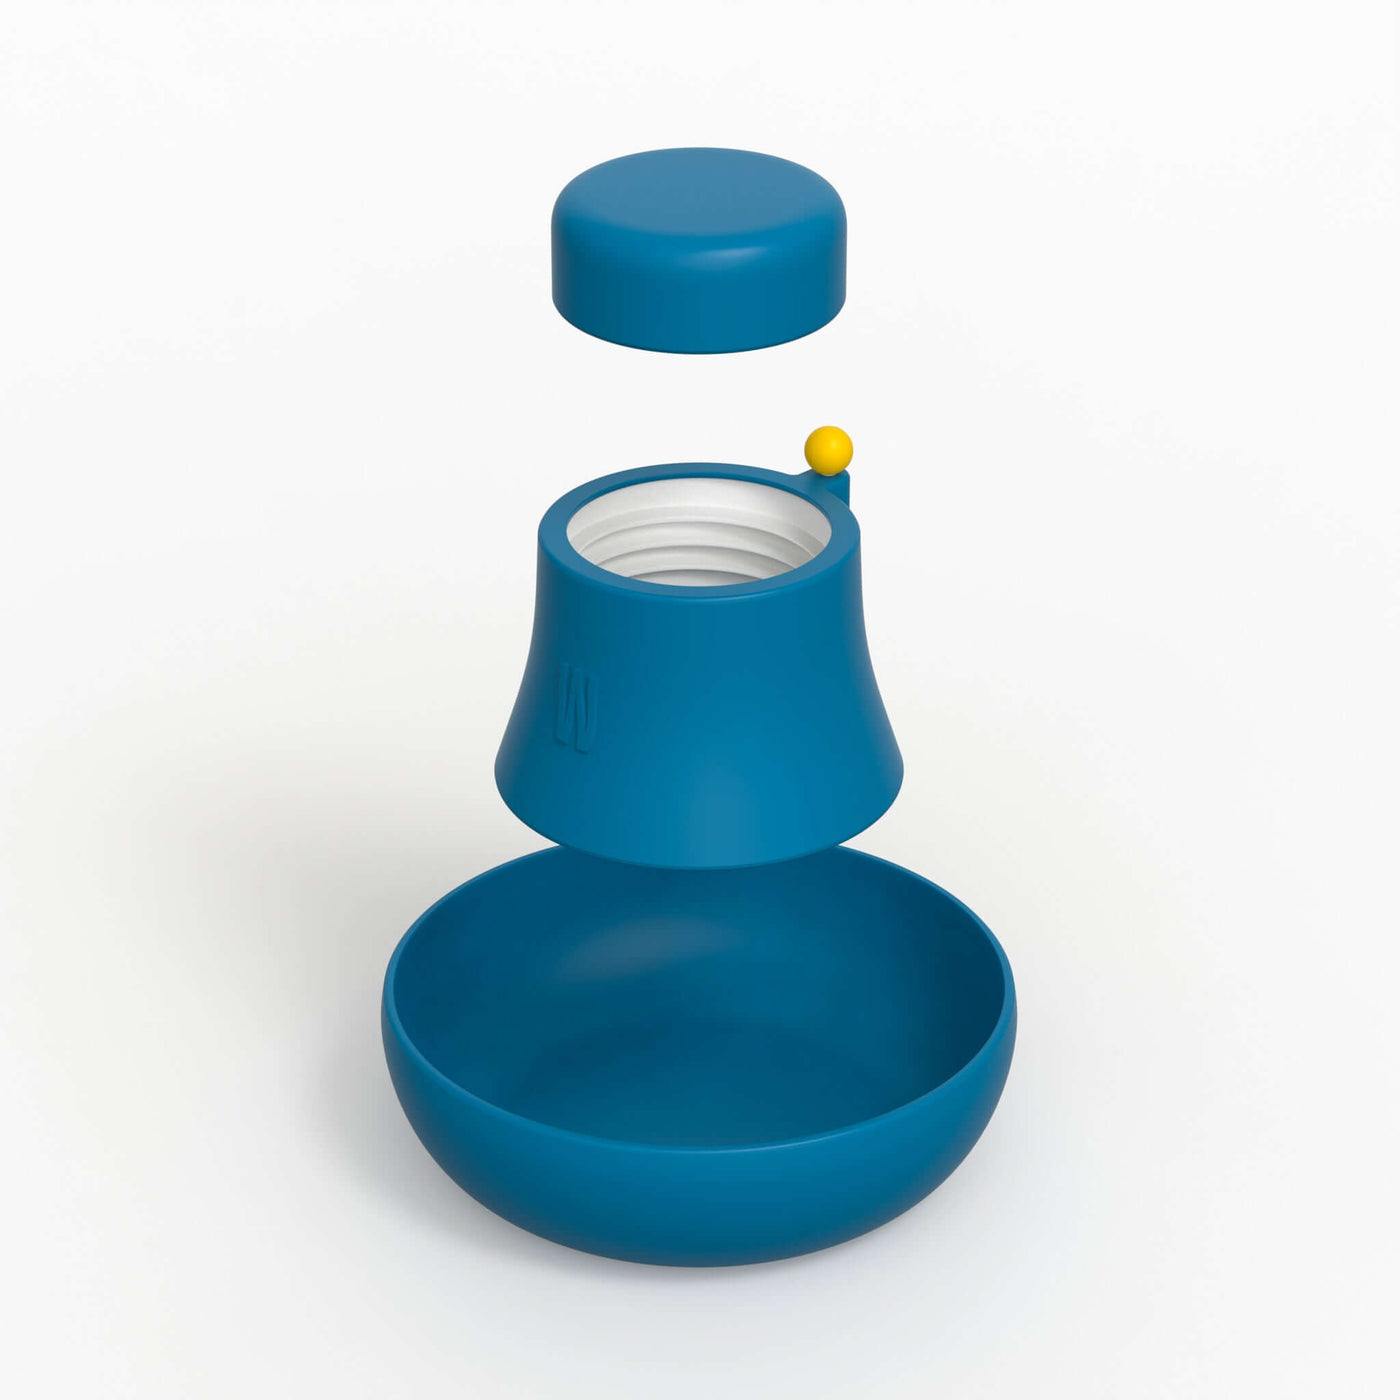 Rendered product photo of midnight blue silicone covers with a yellow poker.